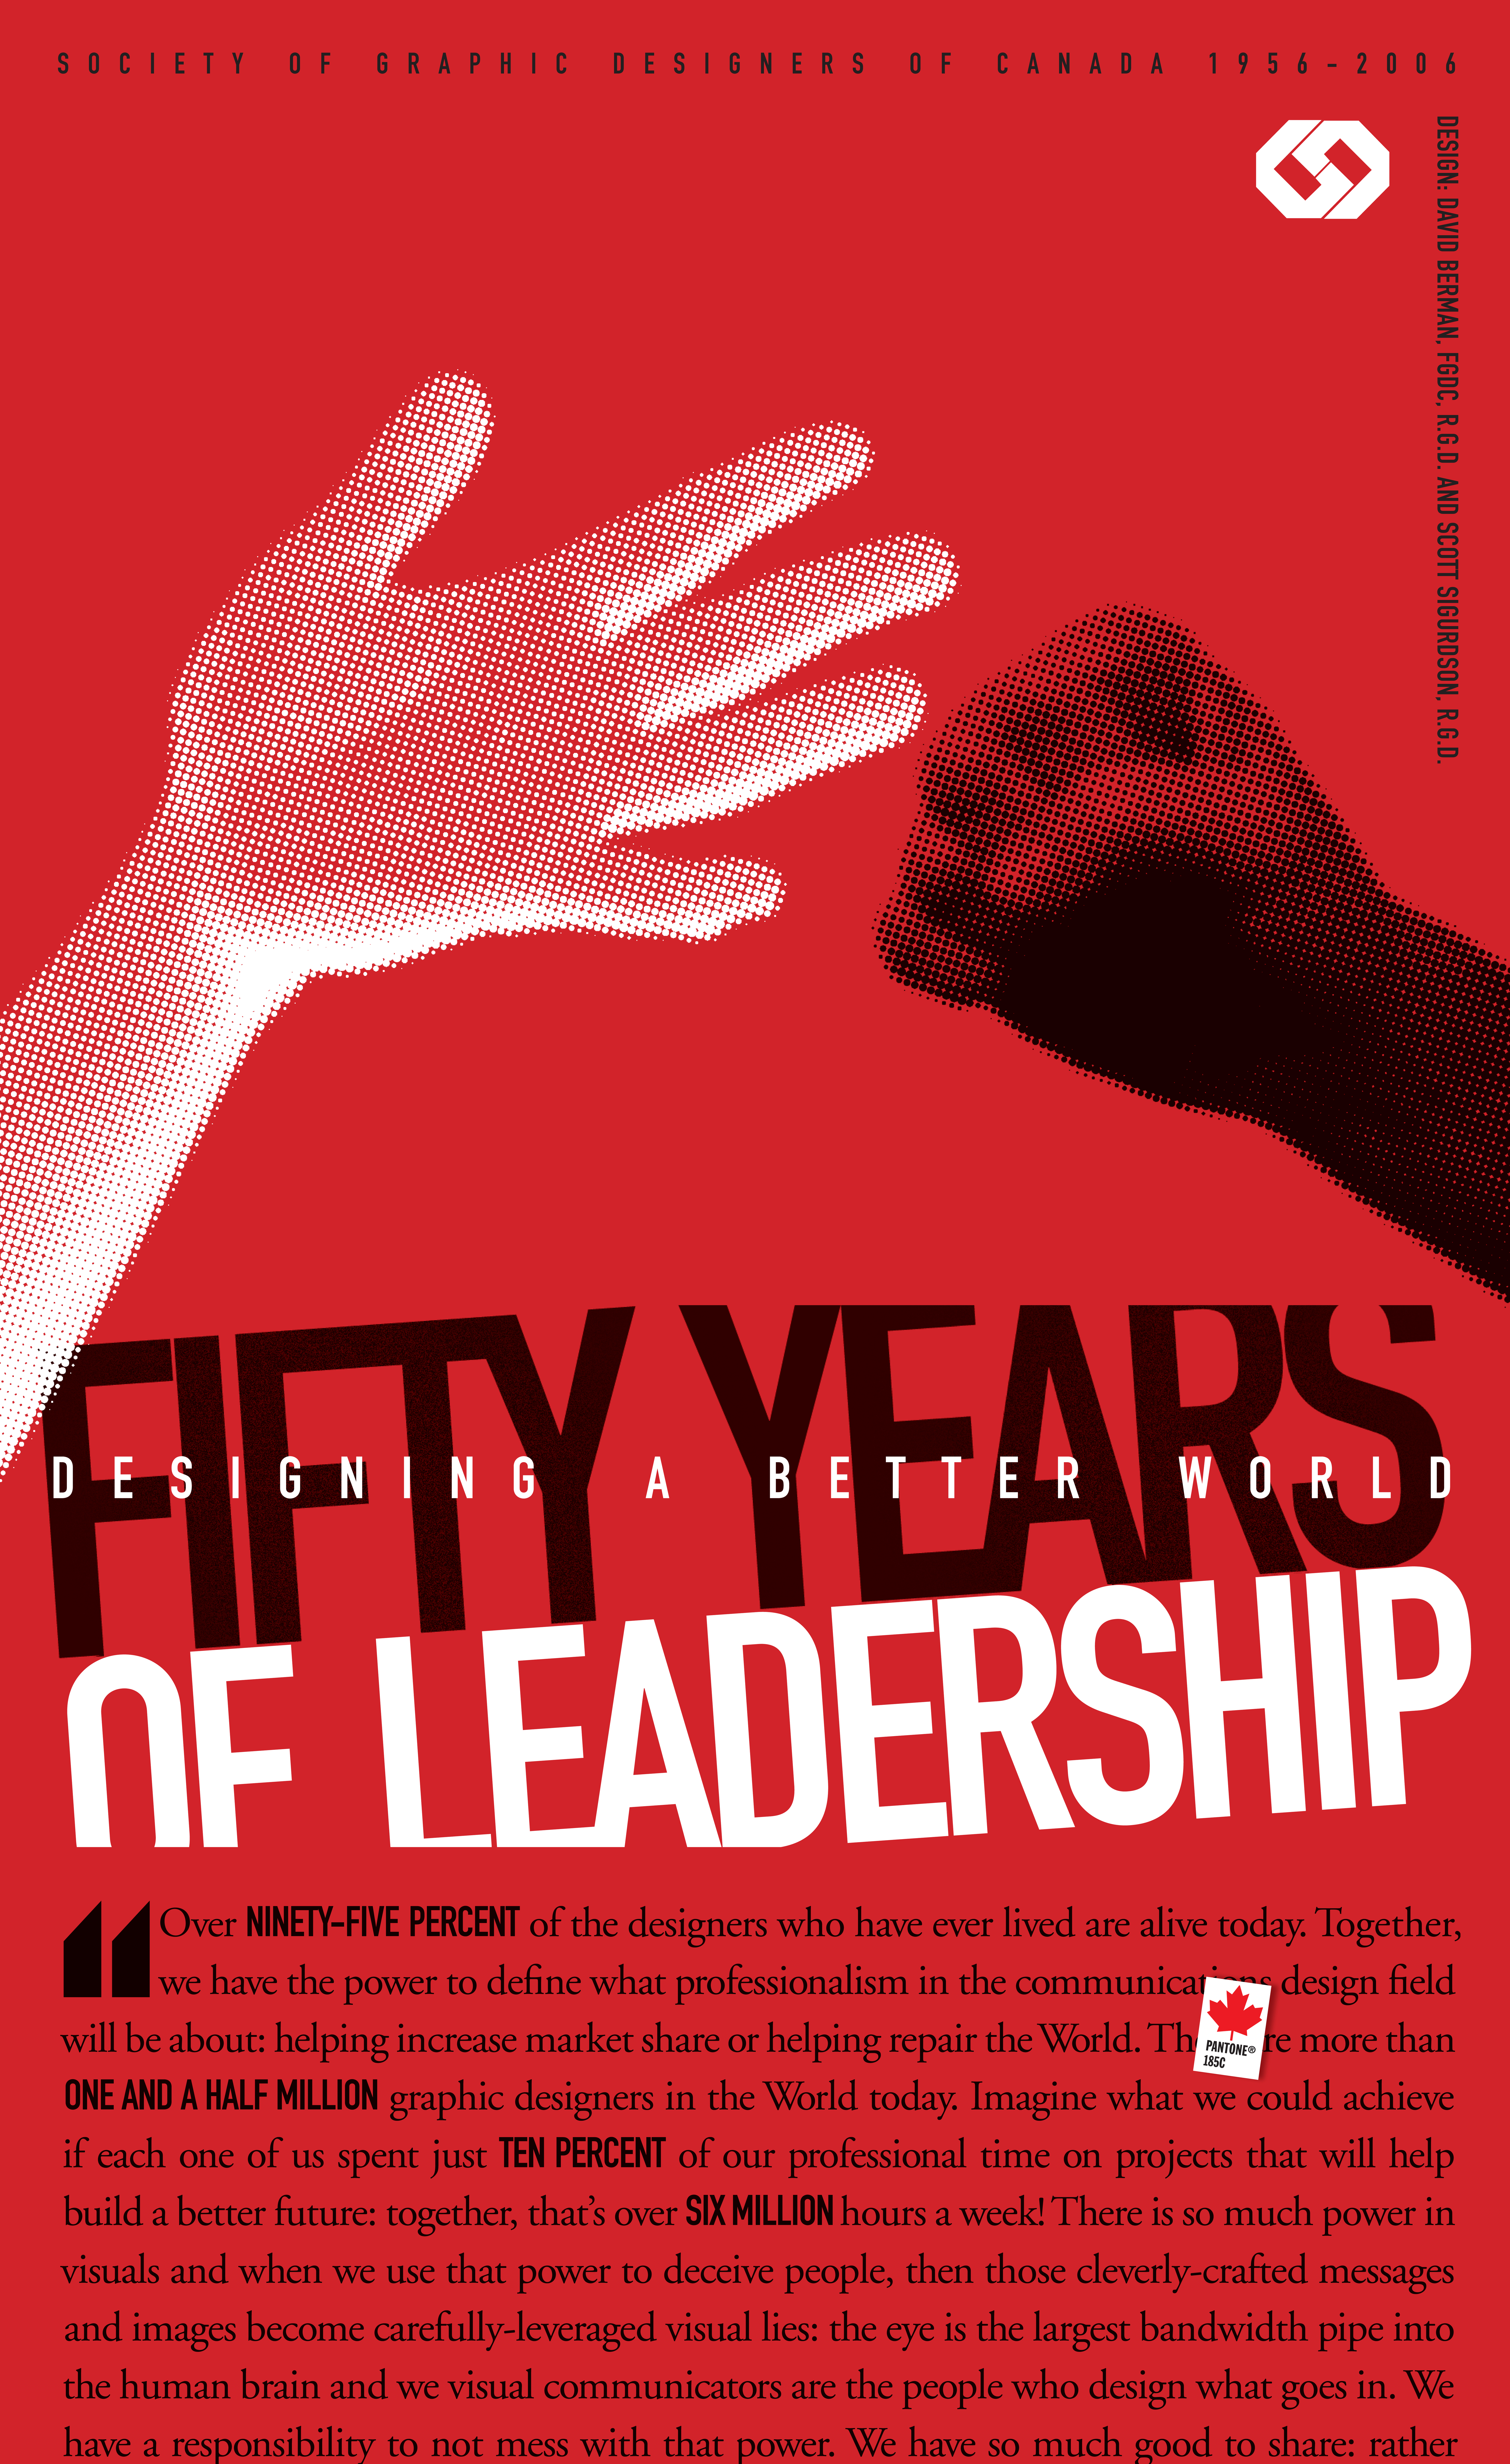 Photo of a poster for GDC 50th anniversary "Fifty Years of Leadership: Designing a better world"